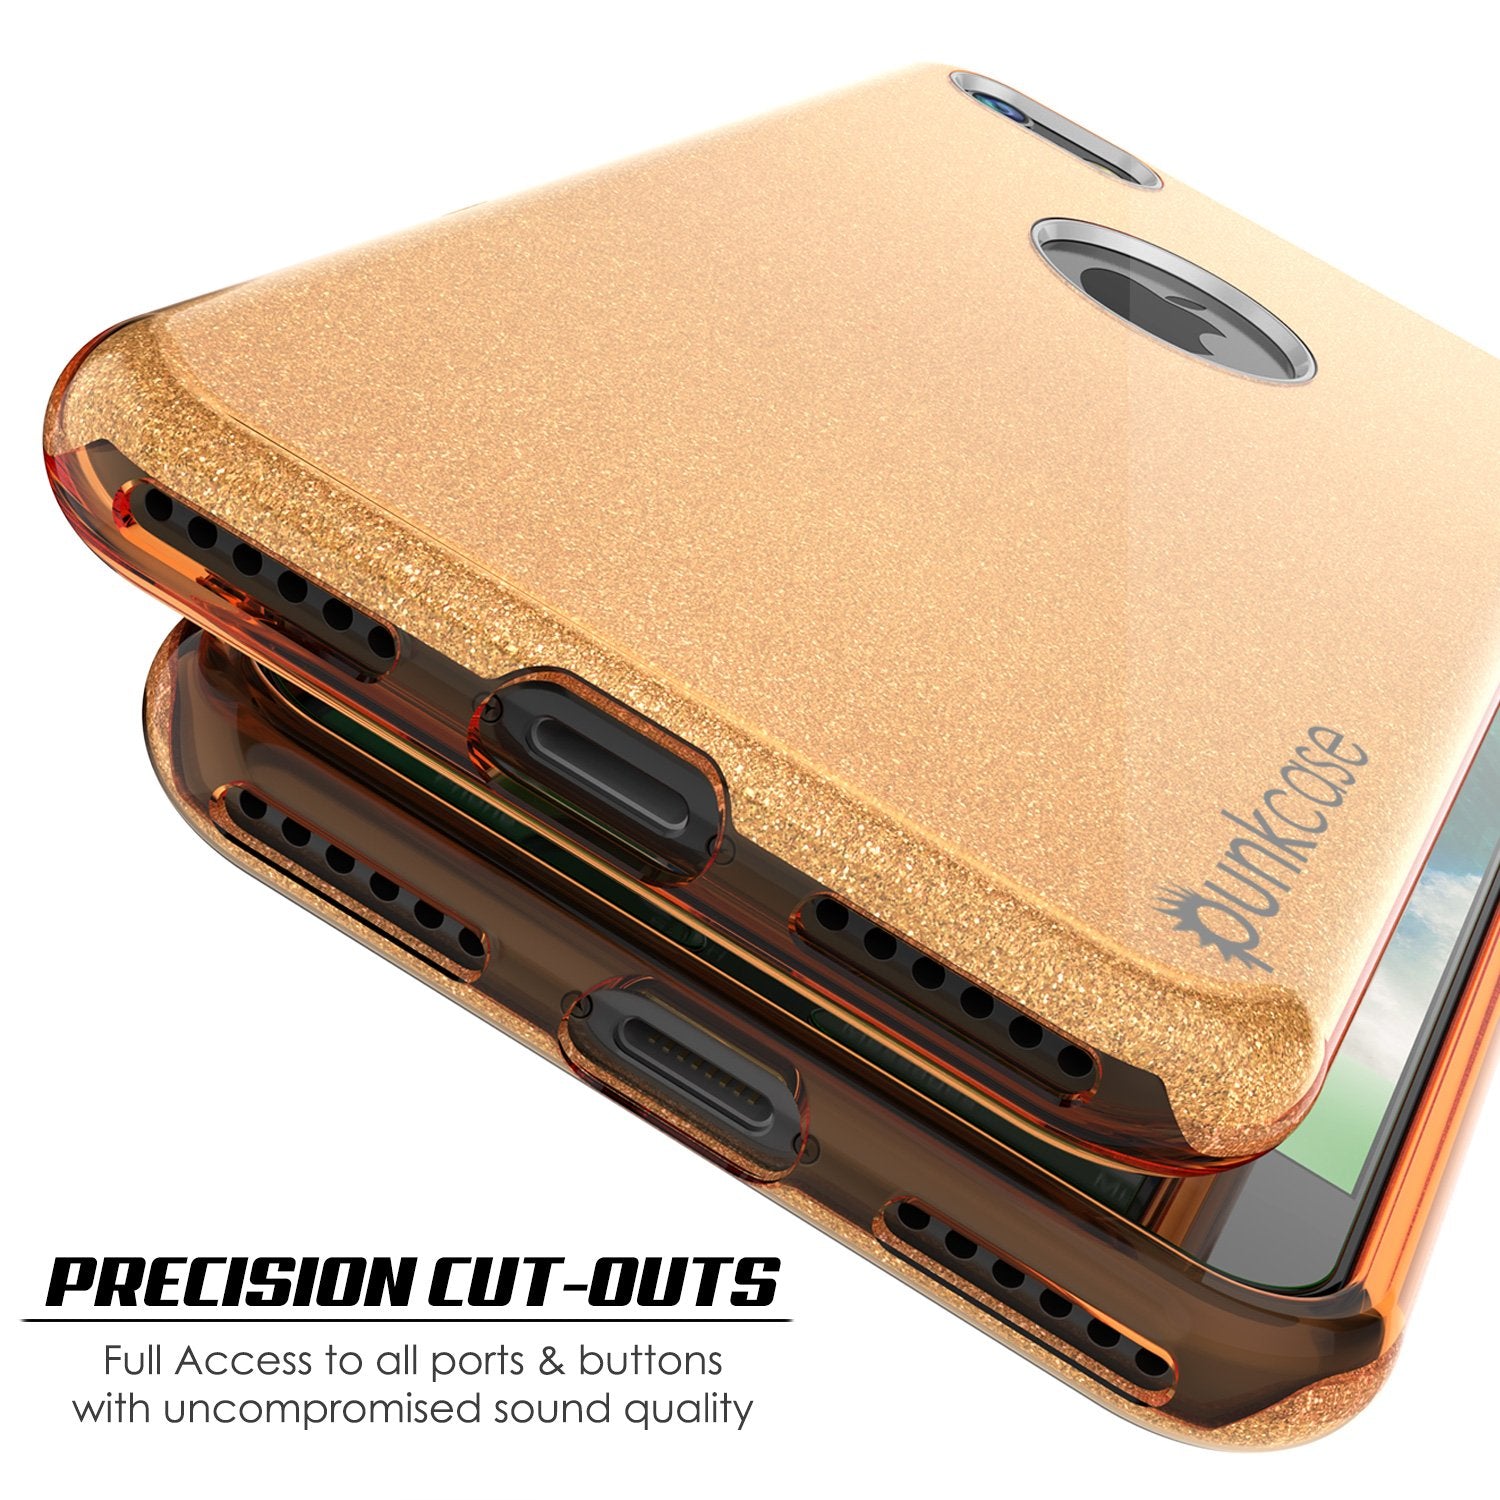 iPhone 8 Case, Punkcase Galactic 2.0 Series Ultra Slim Protective Armor TPU Cover [Gold]